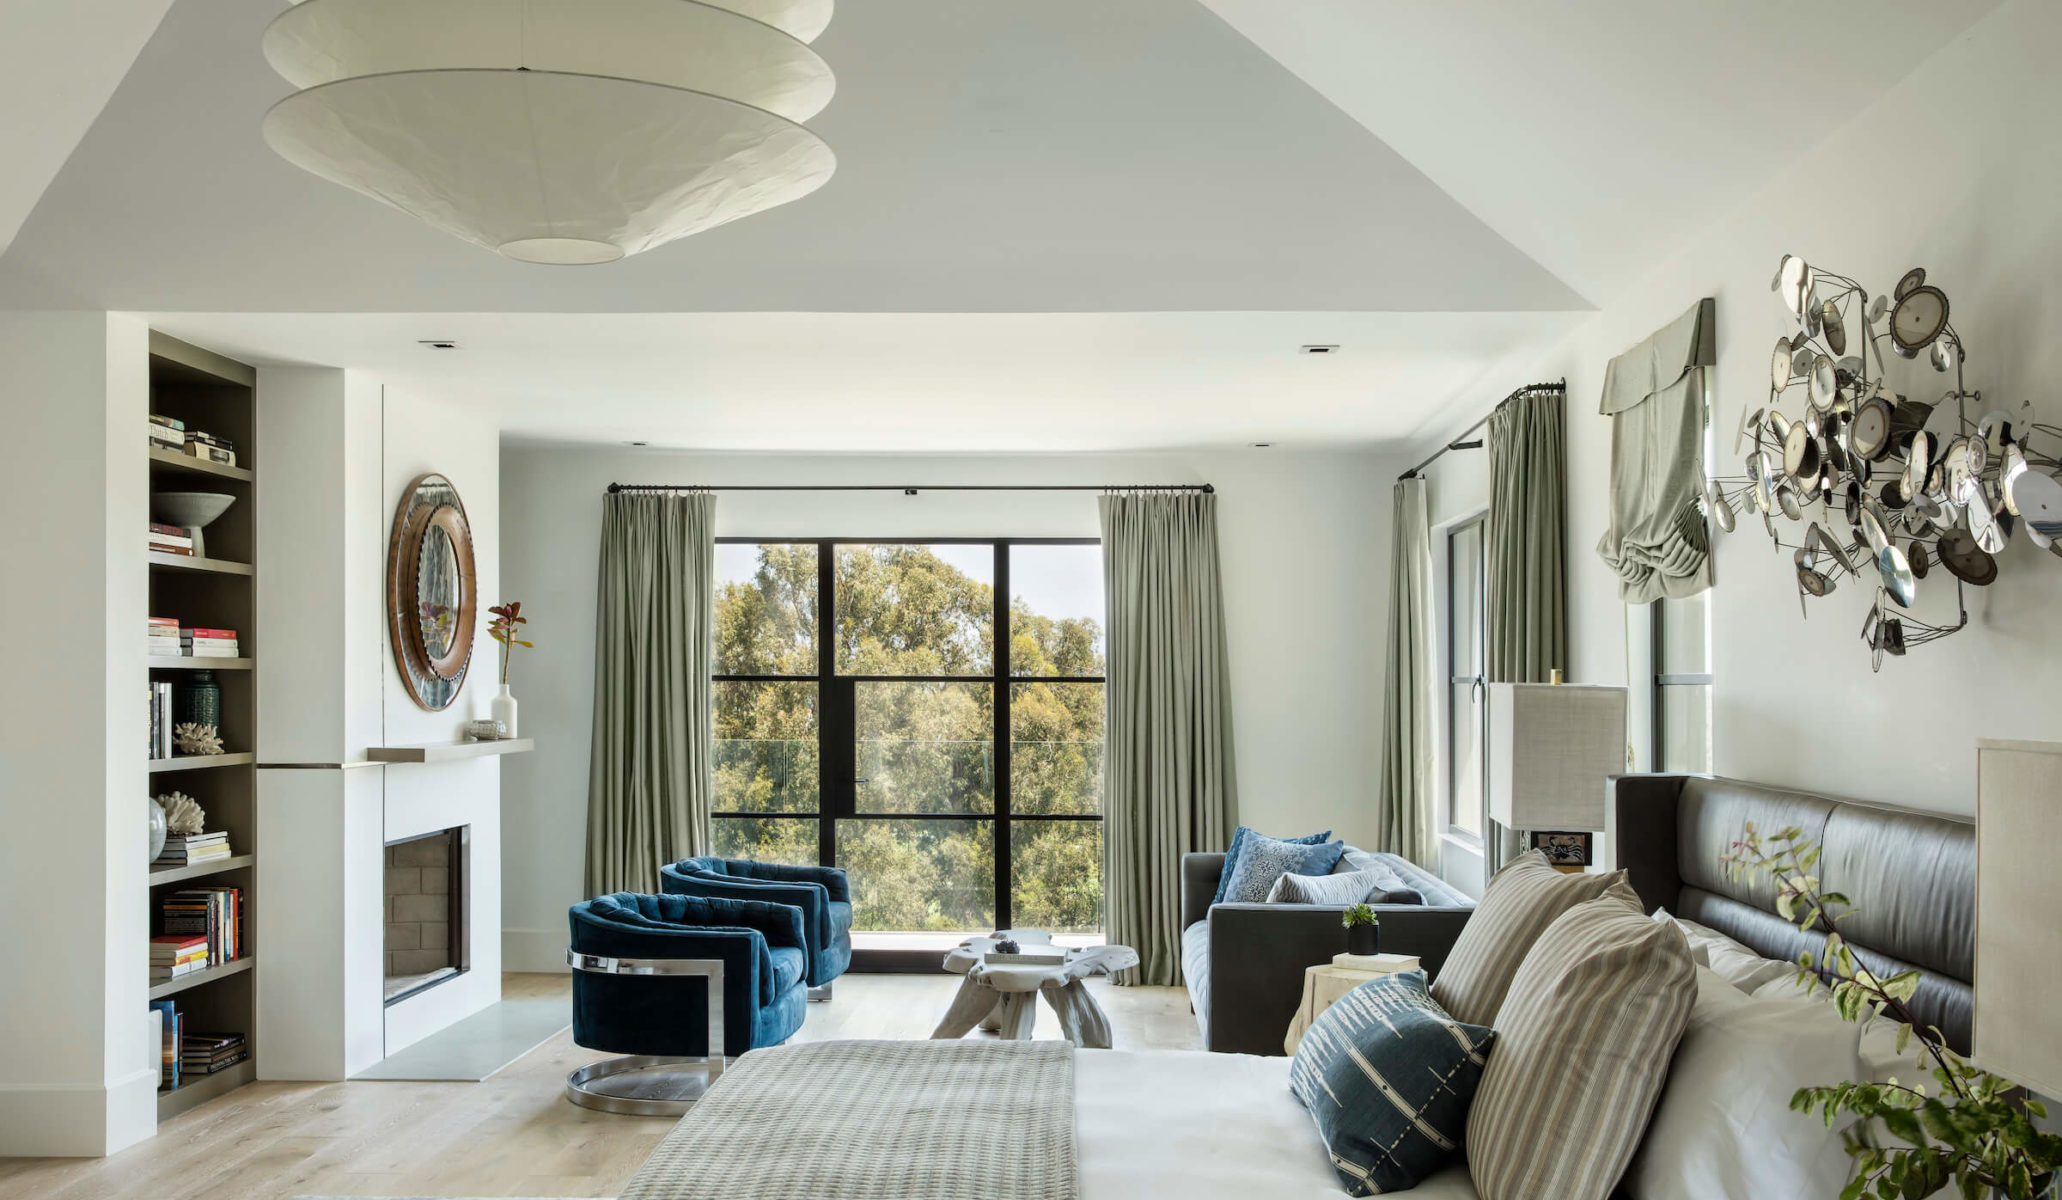 Pacific Palisades Home Interior Design by Tim Clarke